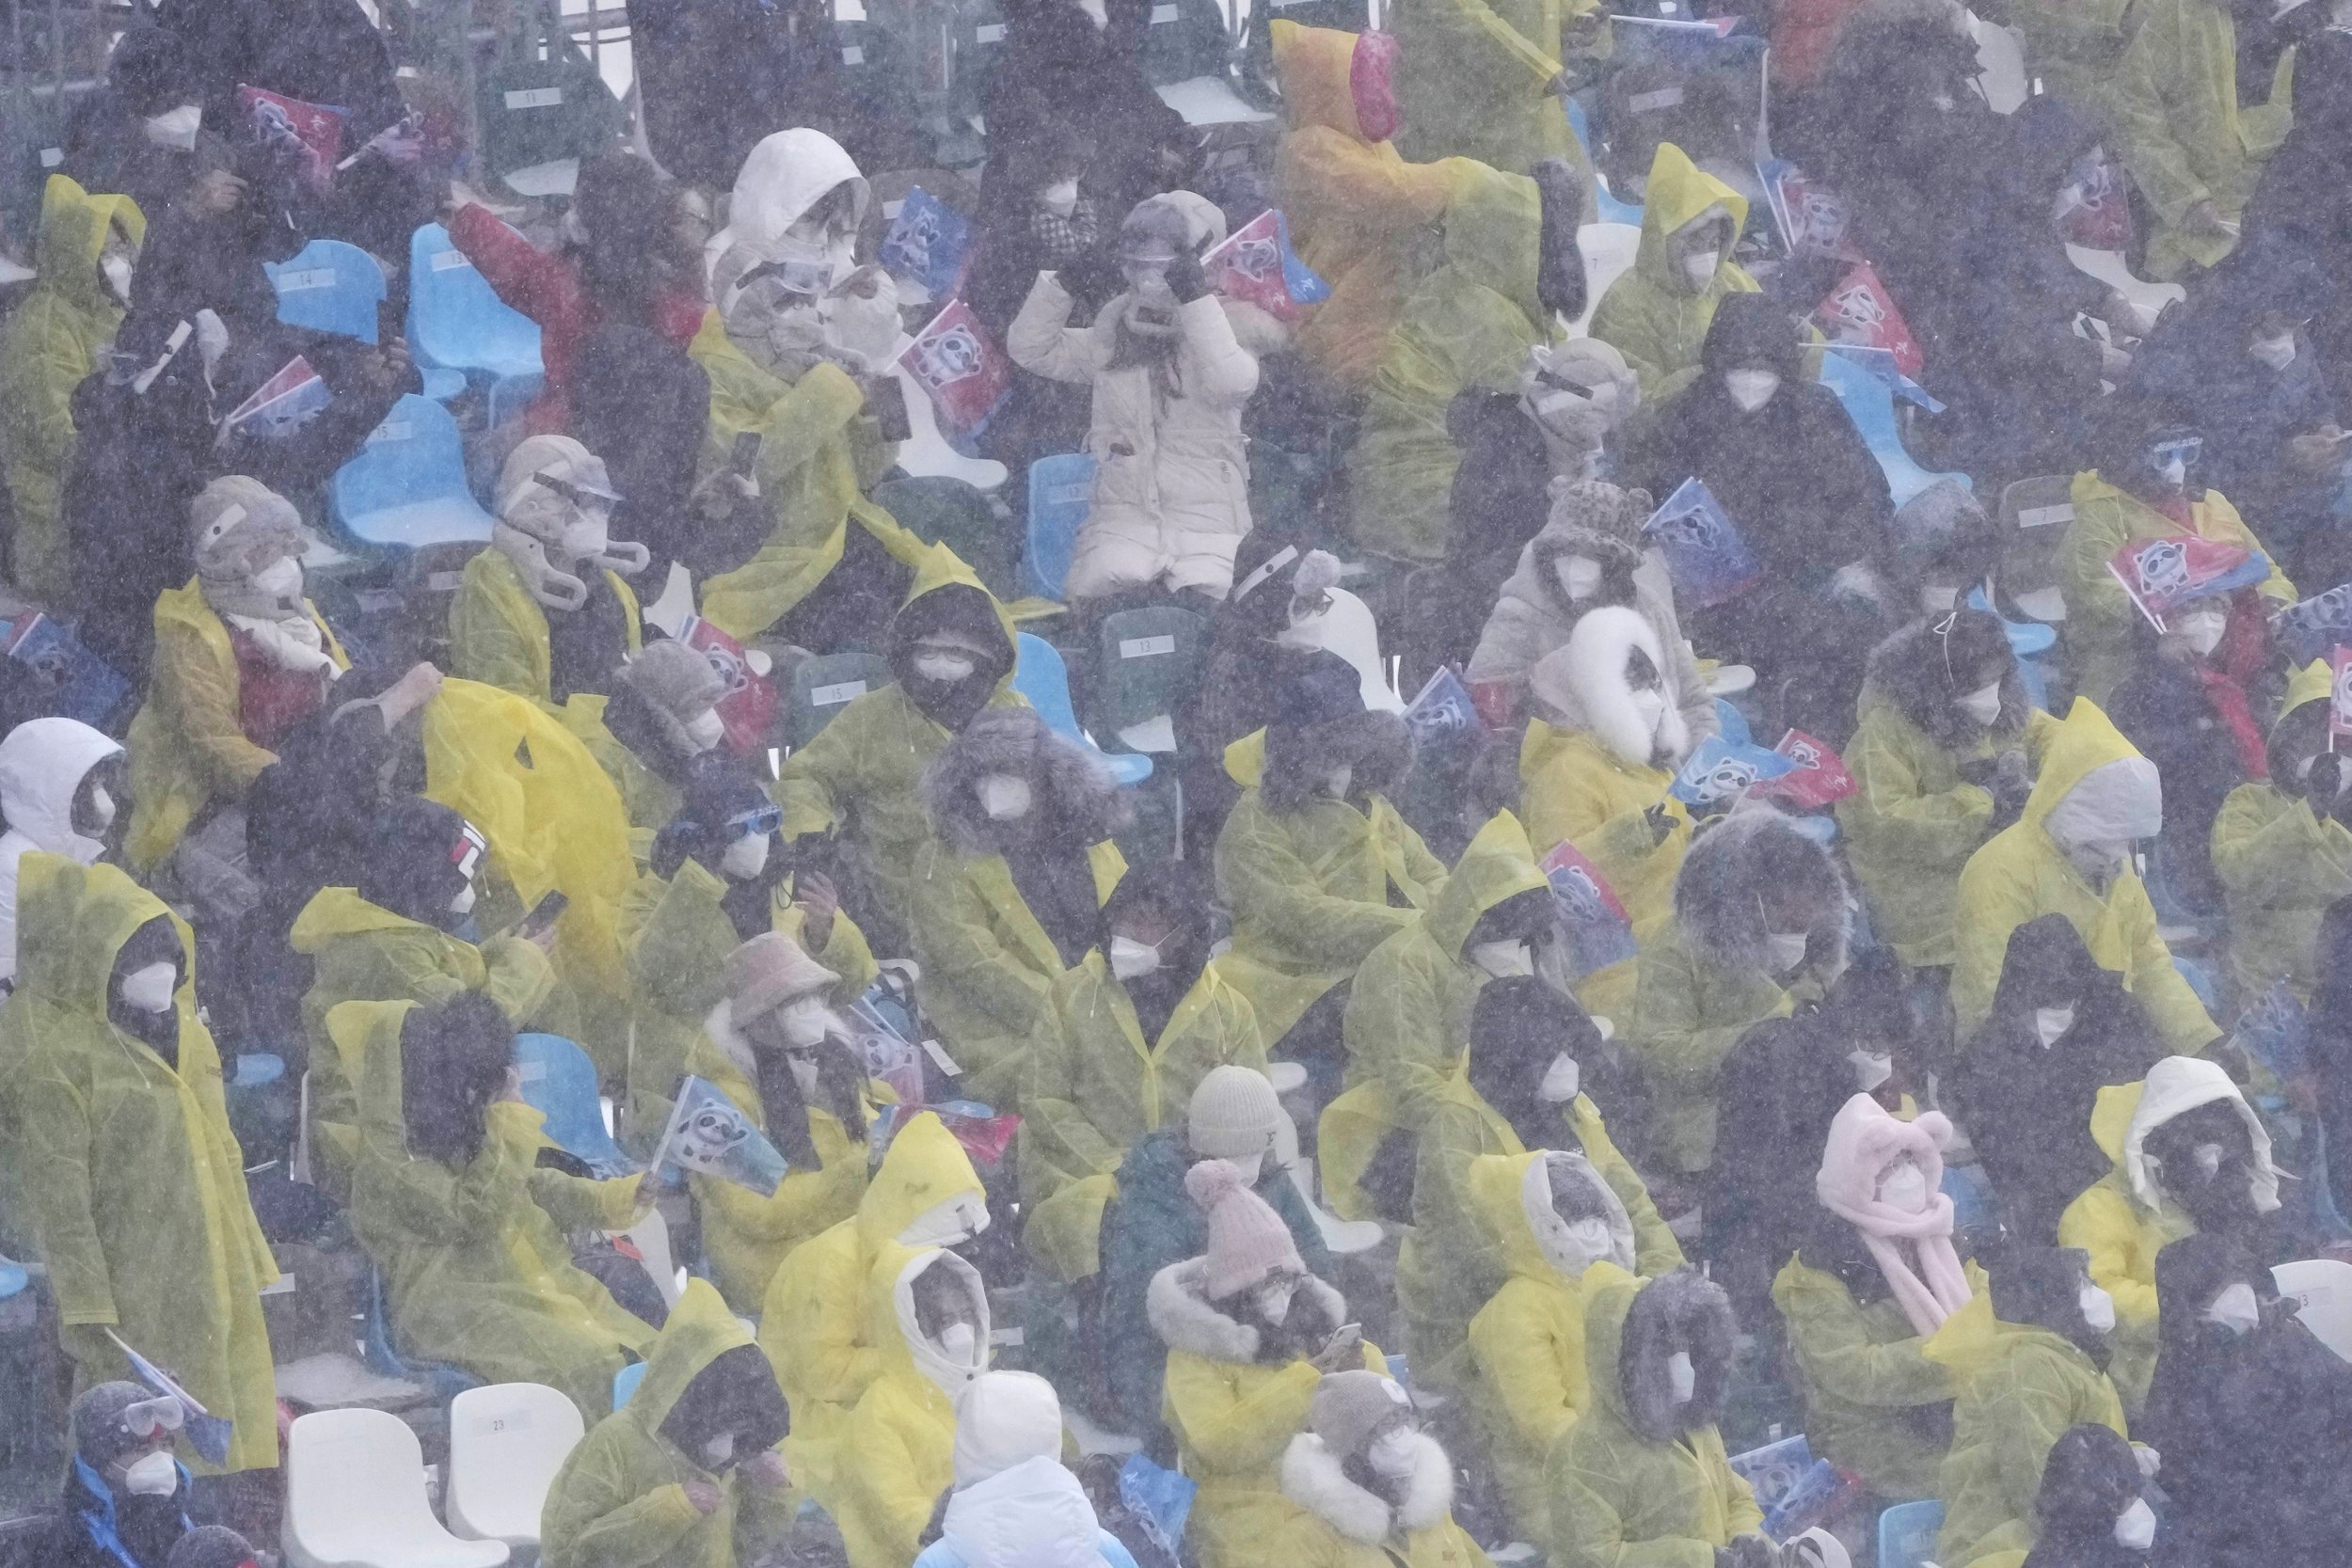  Spectators watch during the mixed team snowboard cross finals as the snow falls at the 2022 Winter Olympics, Saturday, Feb. 12, 2022, in Zhangjiakou, China. (AP Photo/Lee Jin-man) 